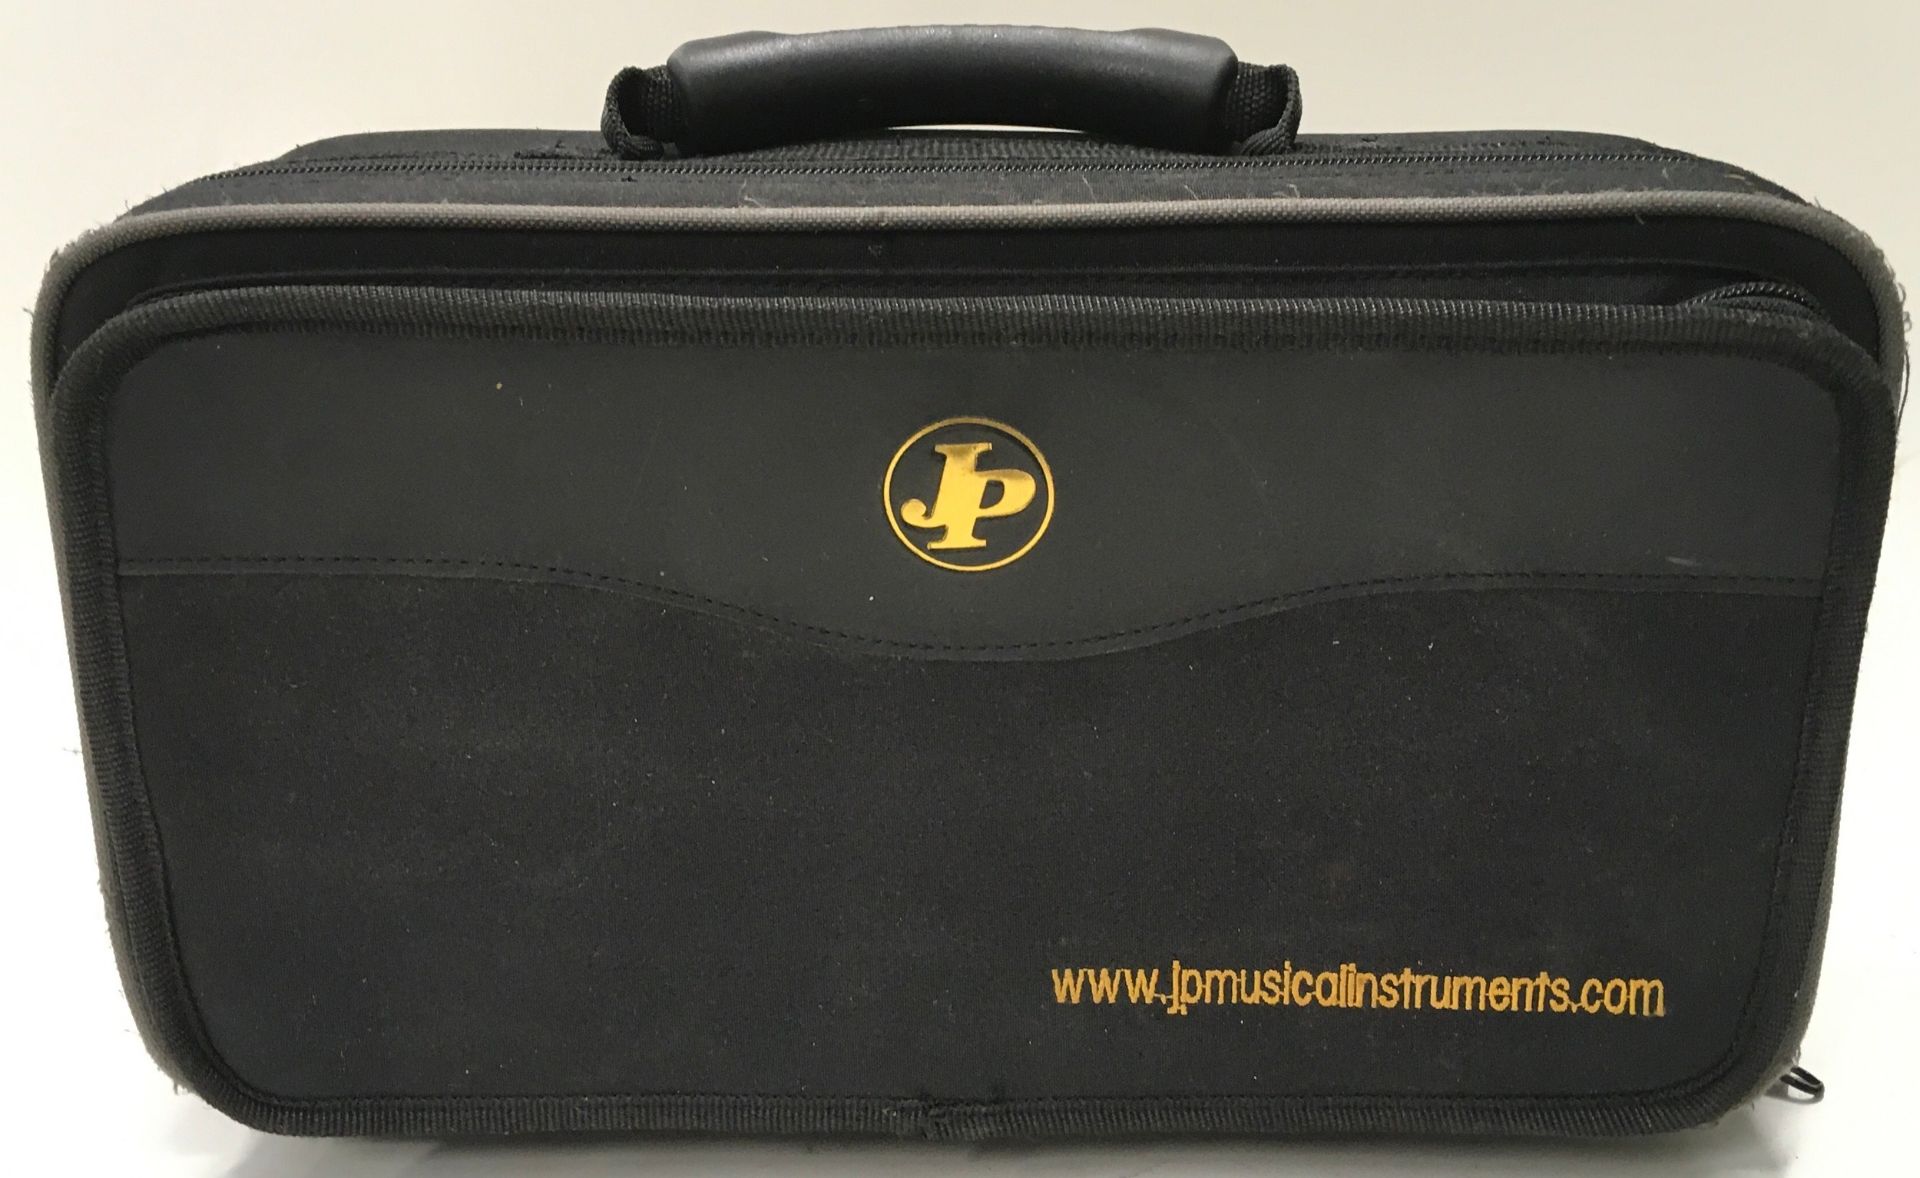 John Packer JP 121 mkIV clarinet in carry case. Very good cosmetic condition. - Image 3 of 3